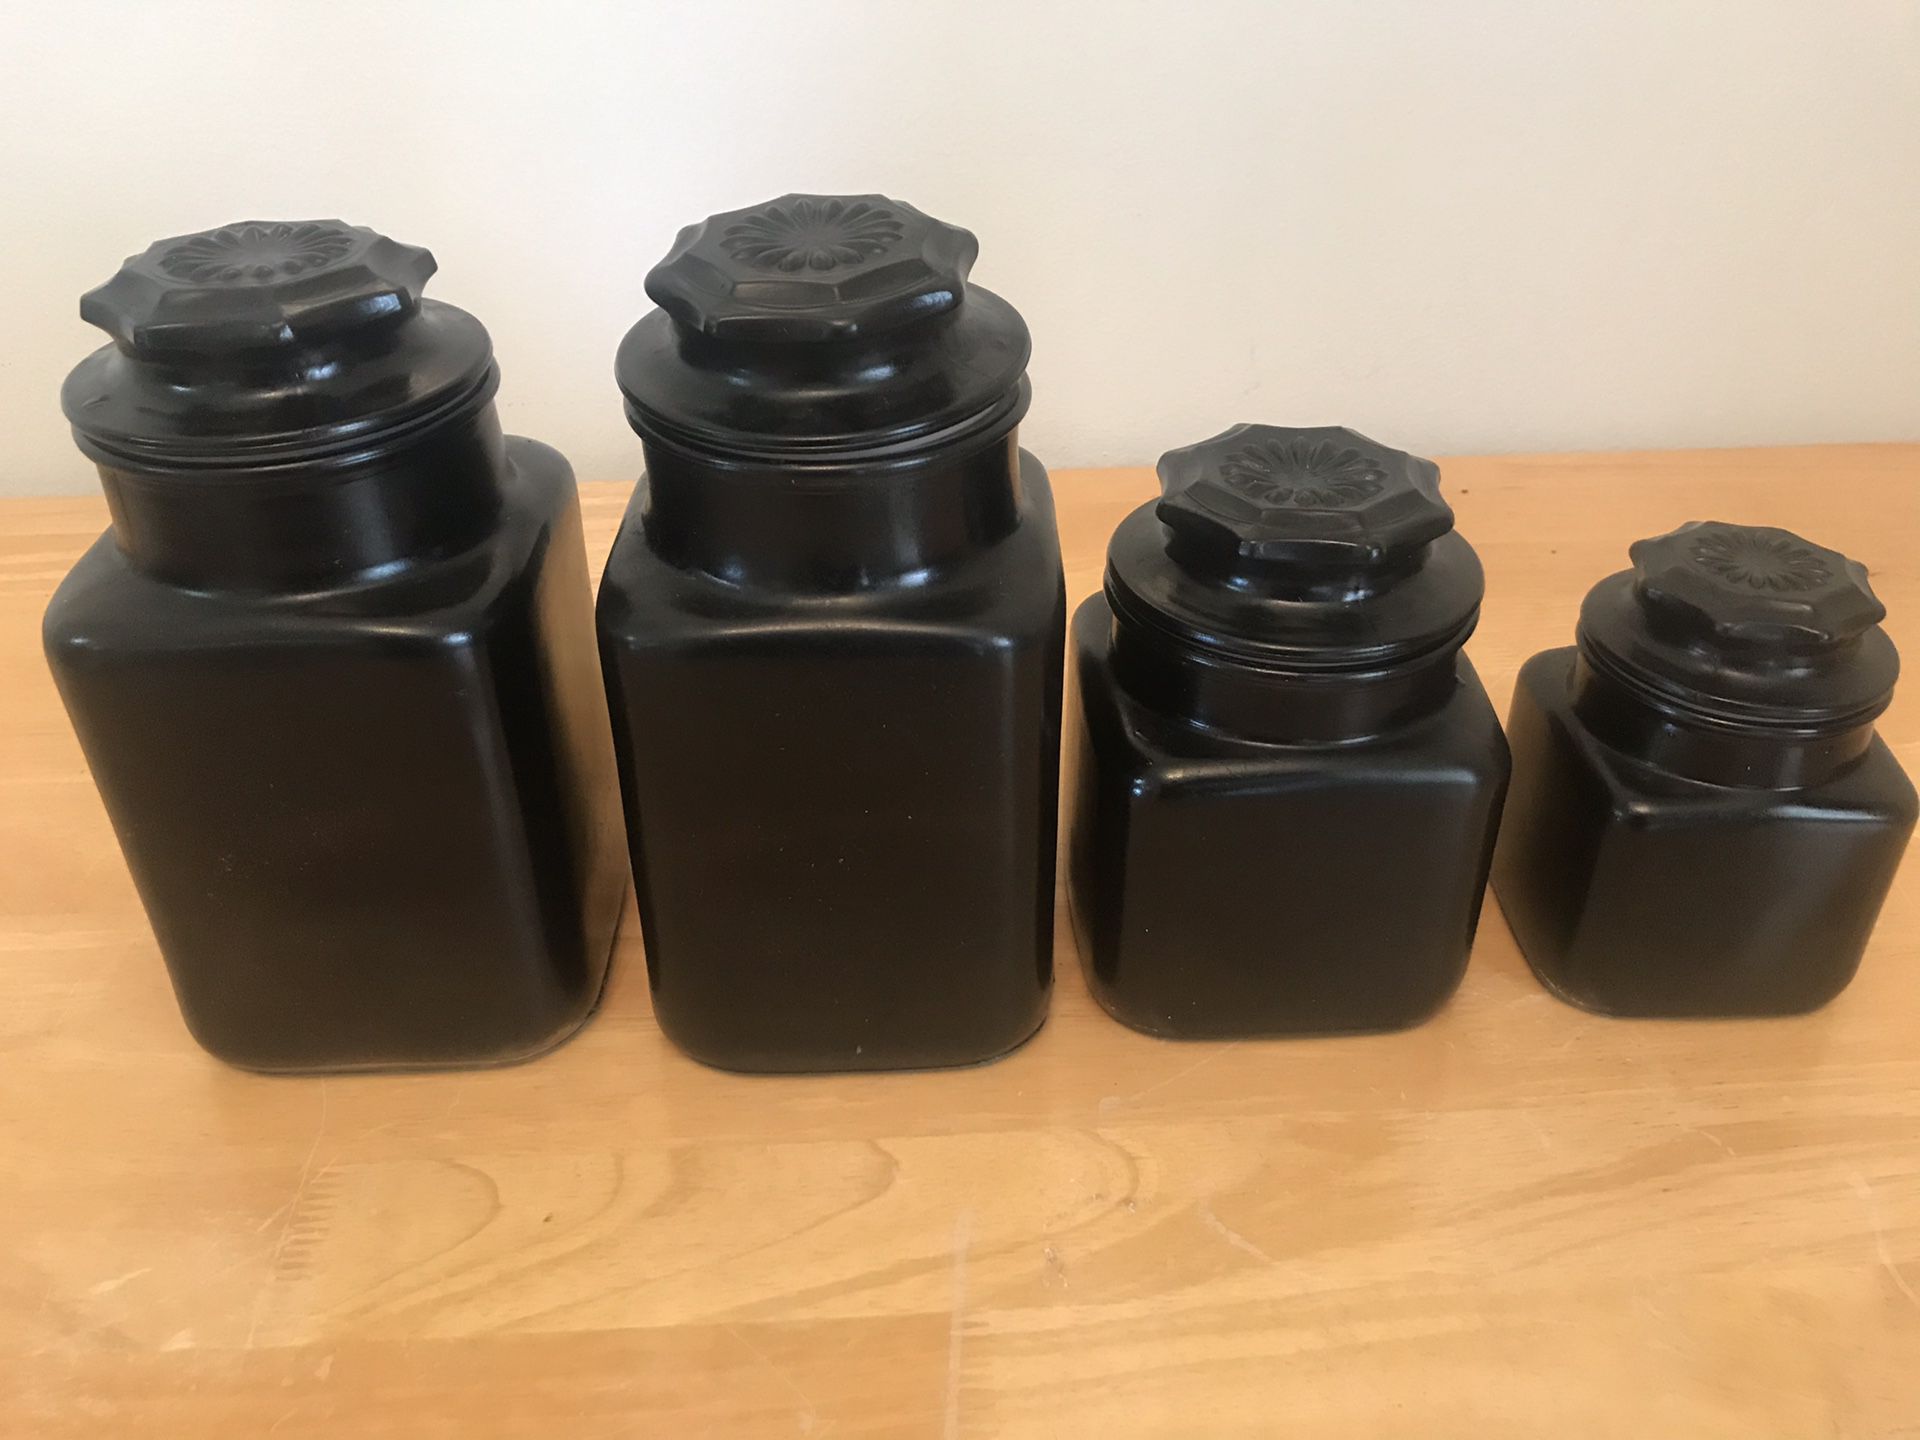 Canister set (there is a 5th small canister not pictured!)